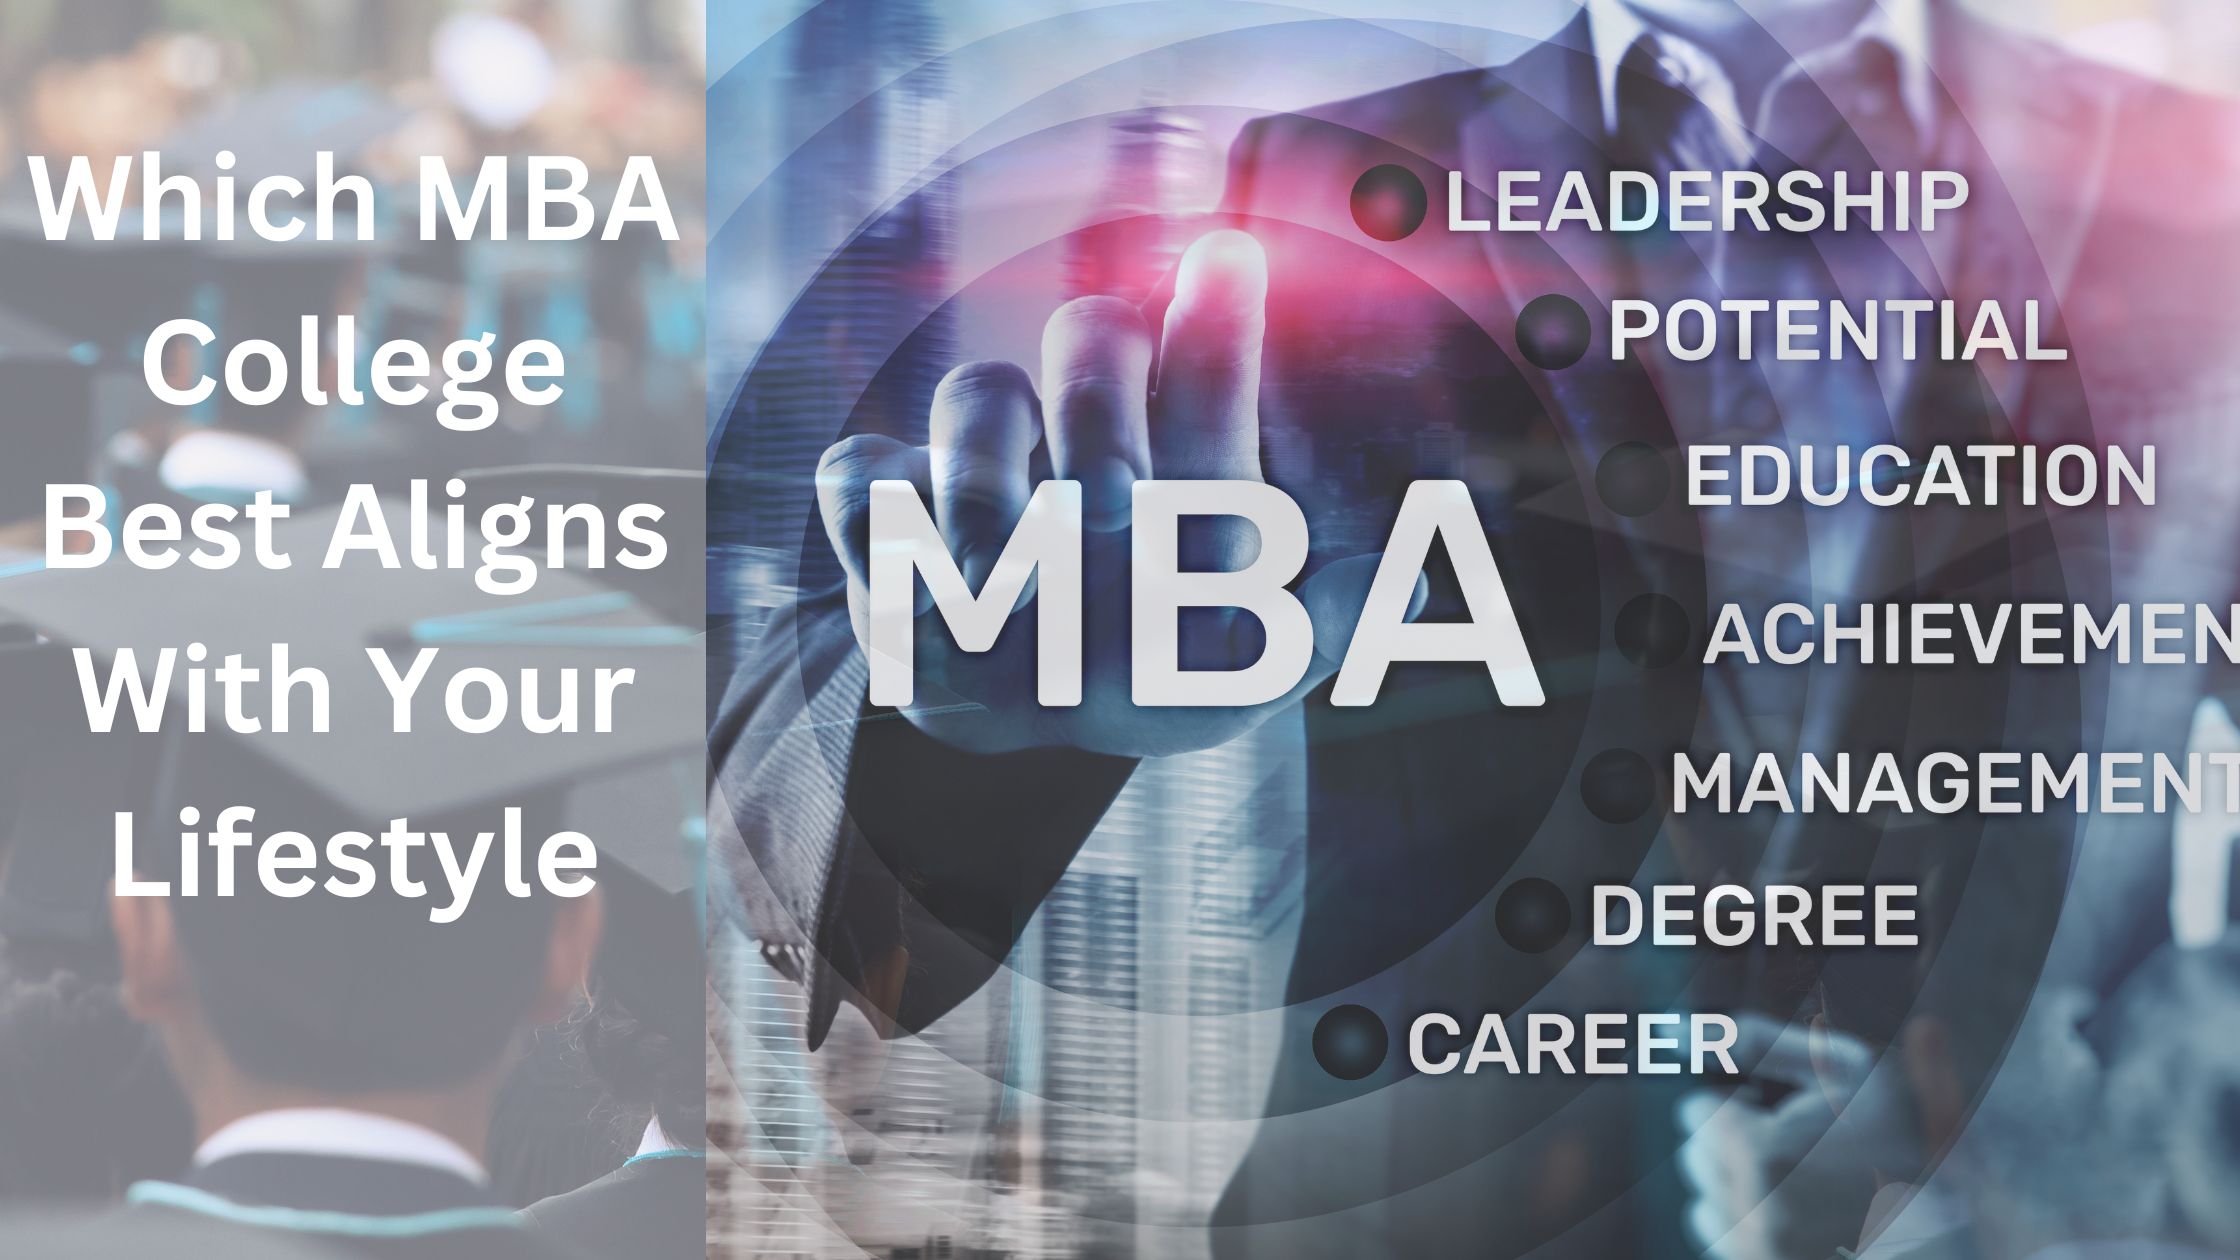 Which MBA College Best Aligns With Your Lifestyle